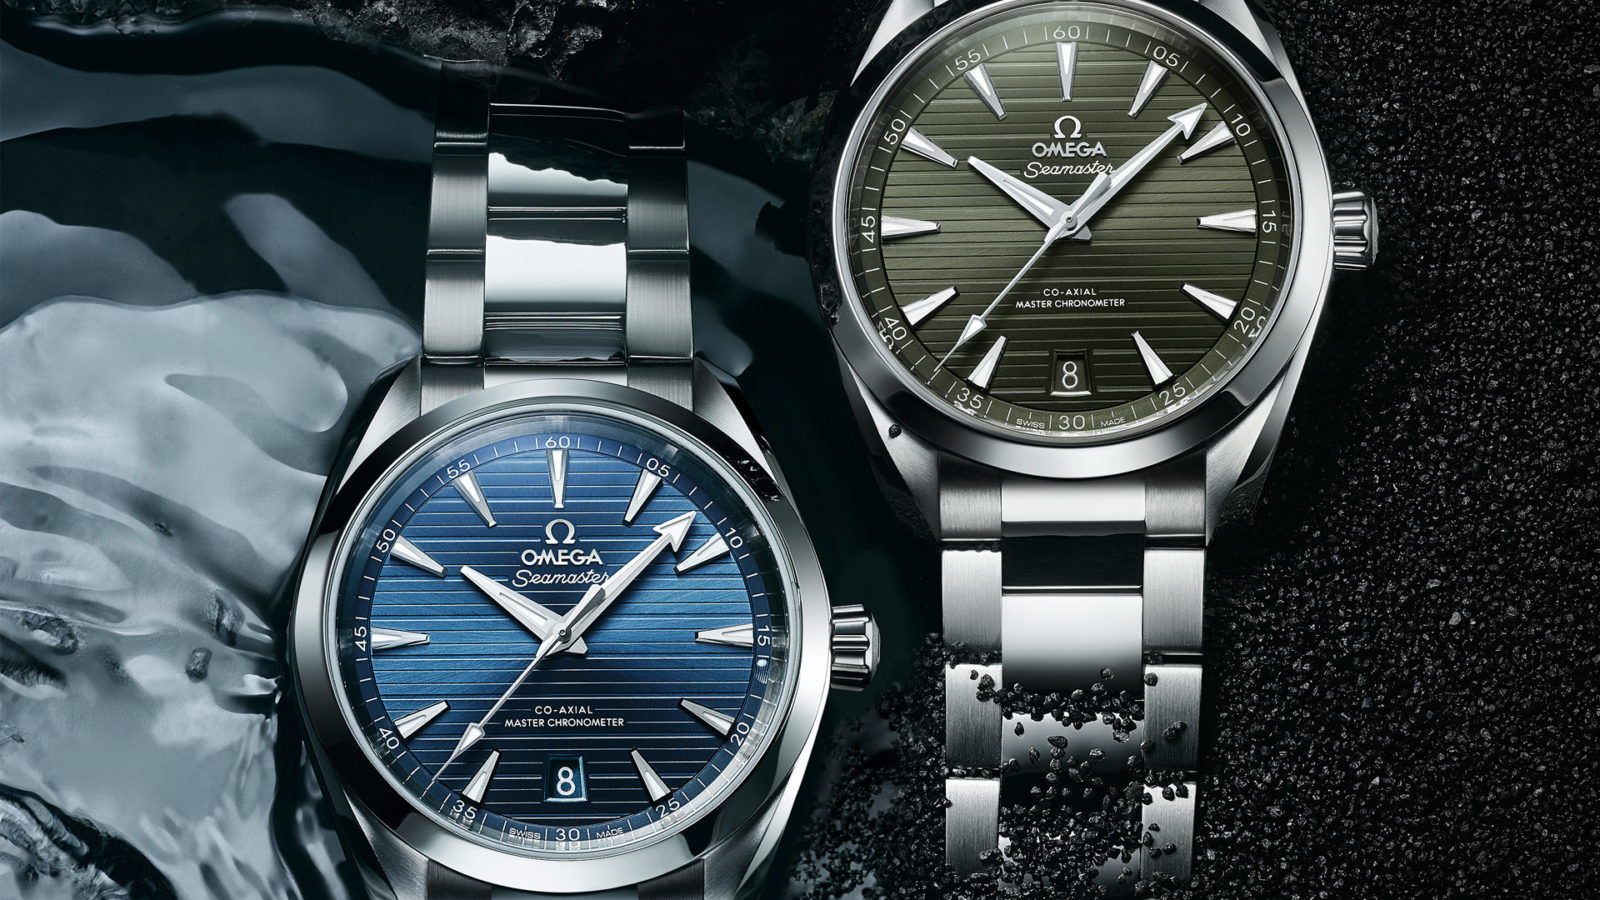 Omega Seamaster Aqua Terra adds two coloured dials to its collection